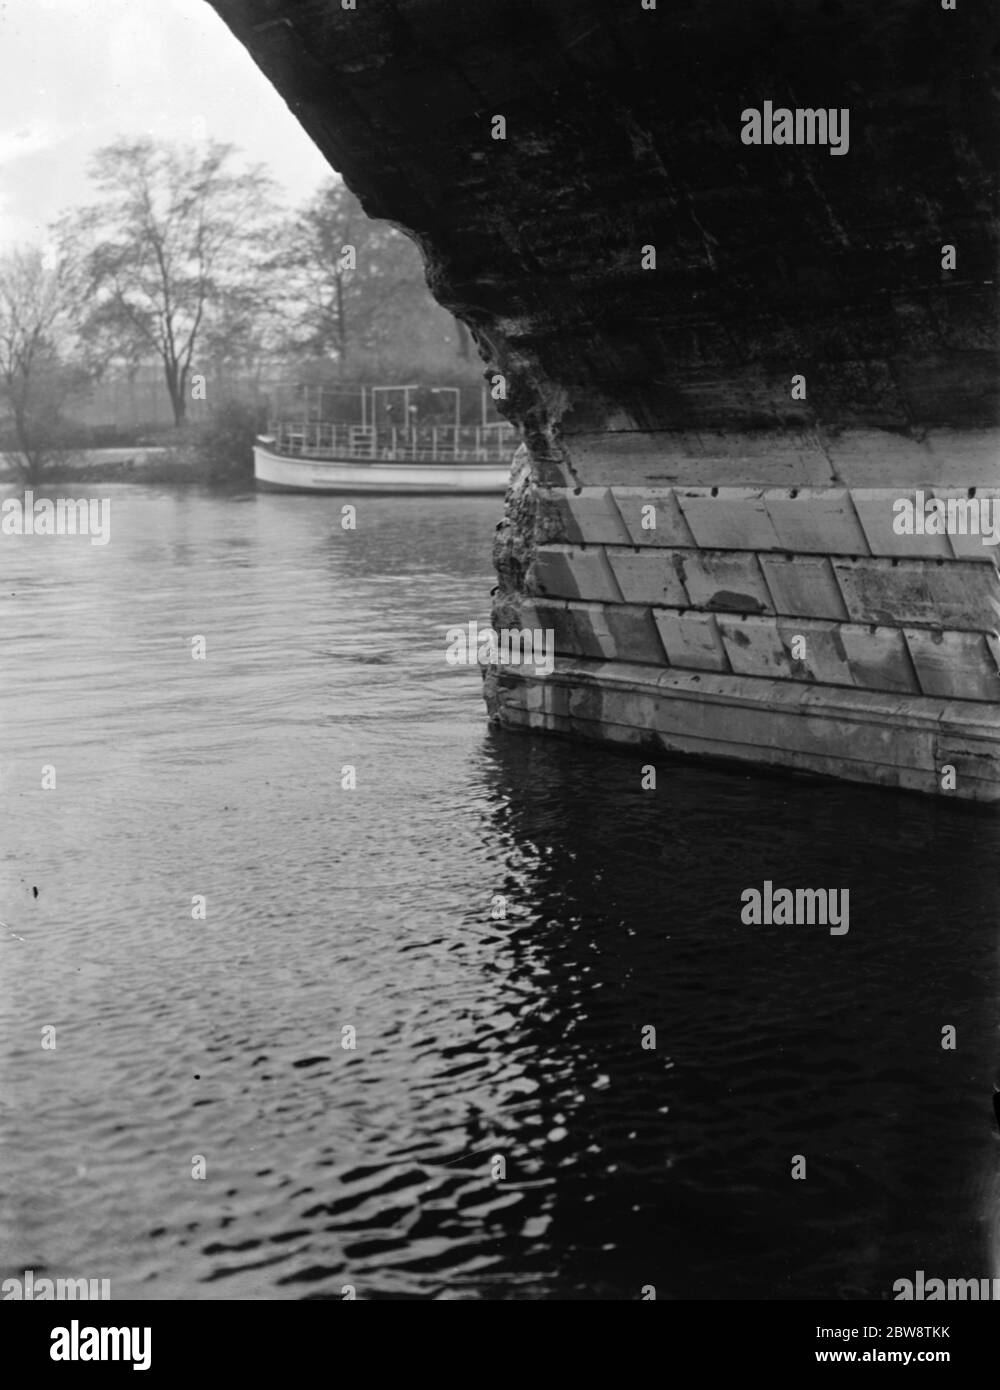 Association of Master Lightermen and Barge Owners have placed an applications for the repair of Richmond Bridge on the river Thames in London . Photos shows the damaged foundation piers of Richmond Bridge . 26 October 1936 Stock Photo